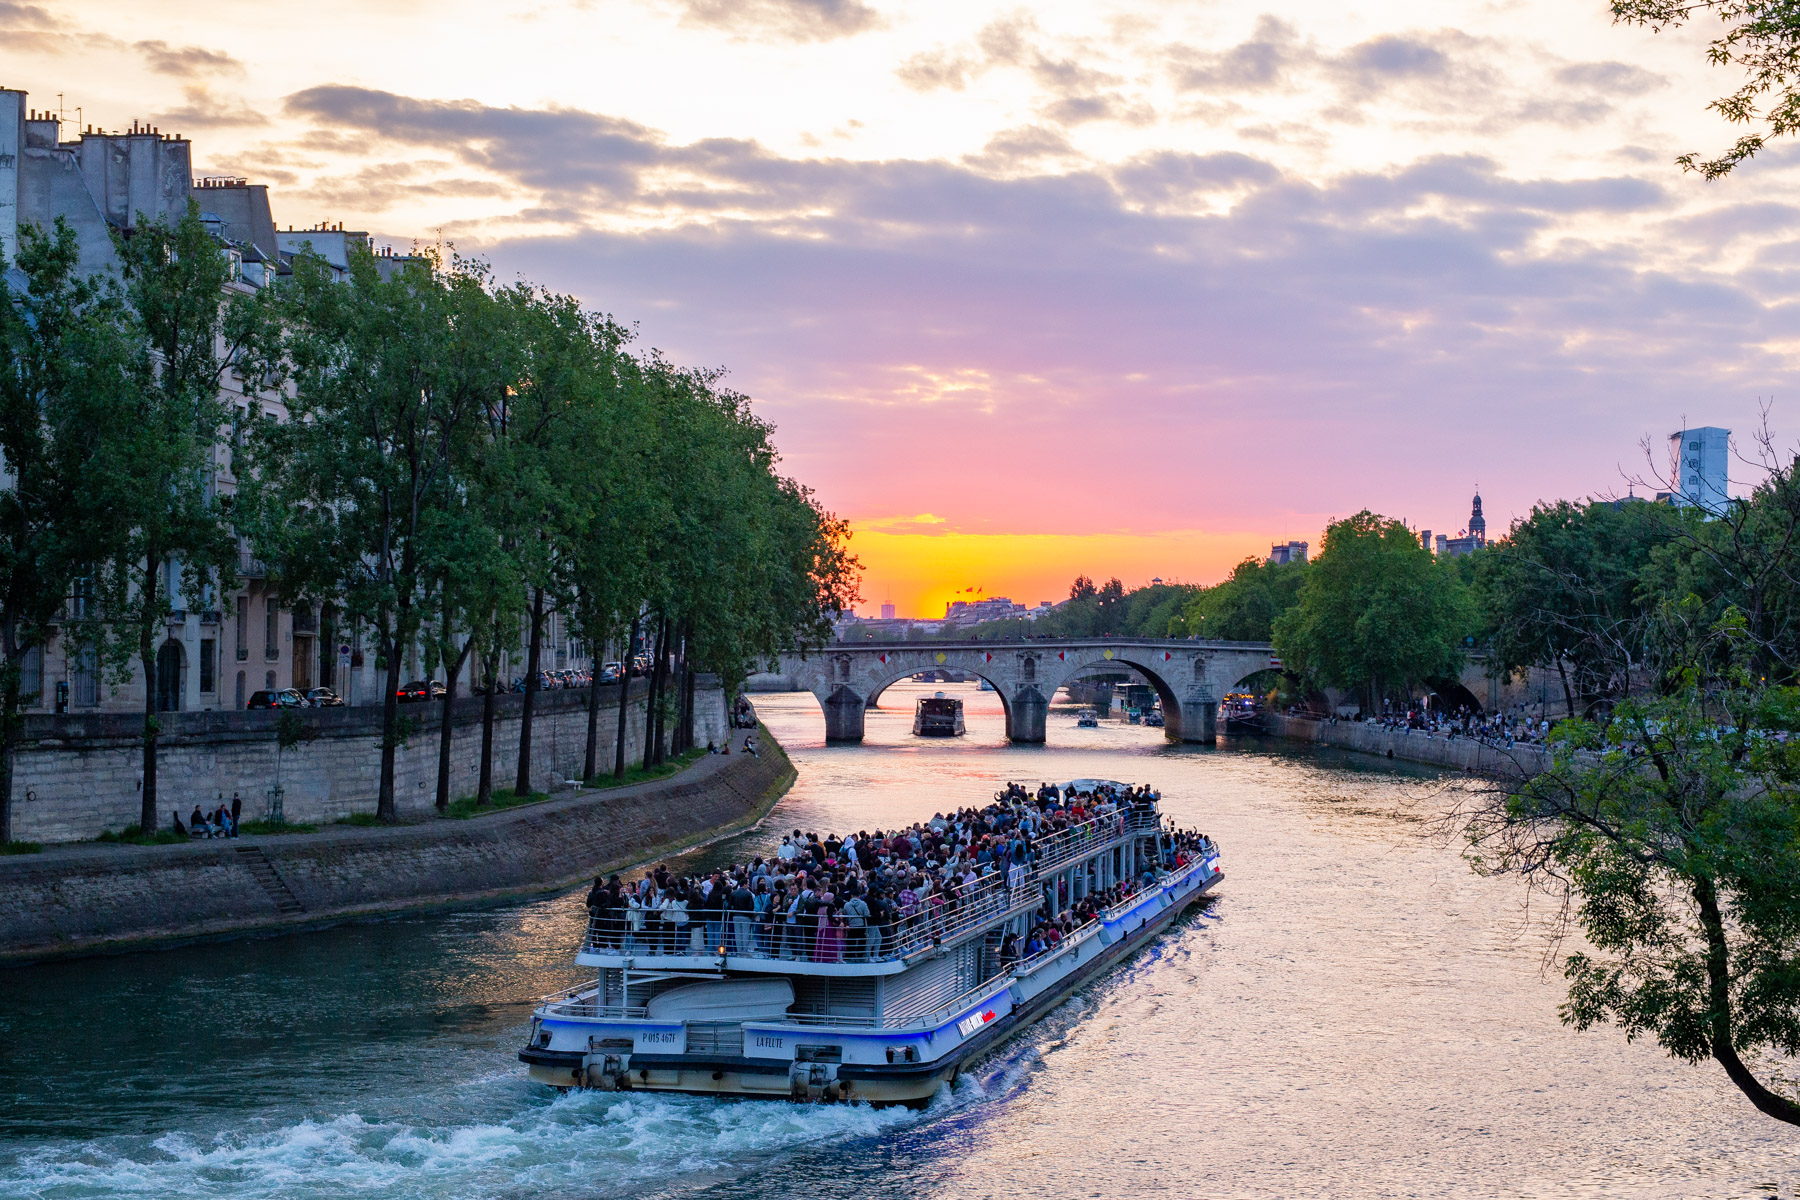 Seine cruise at sunset
Things to do in Paris at night